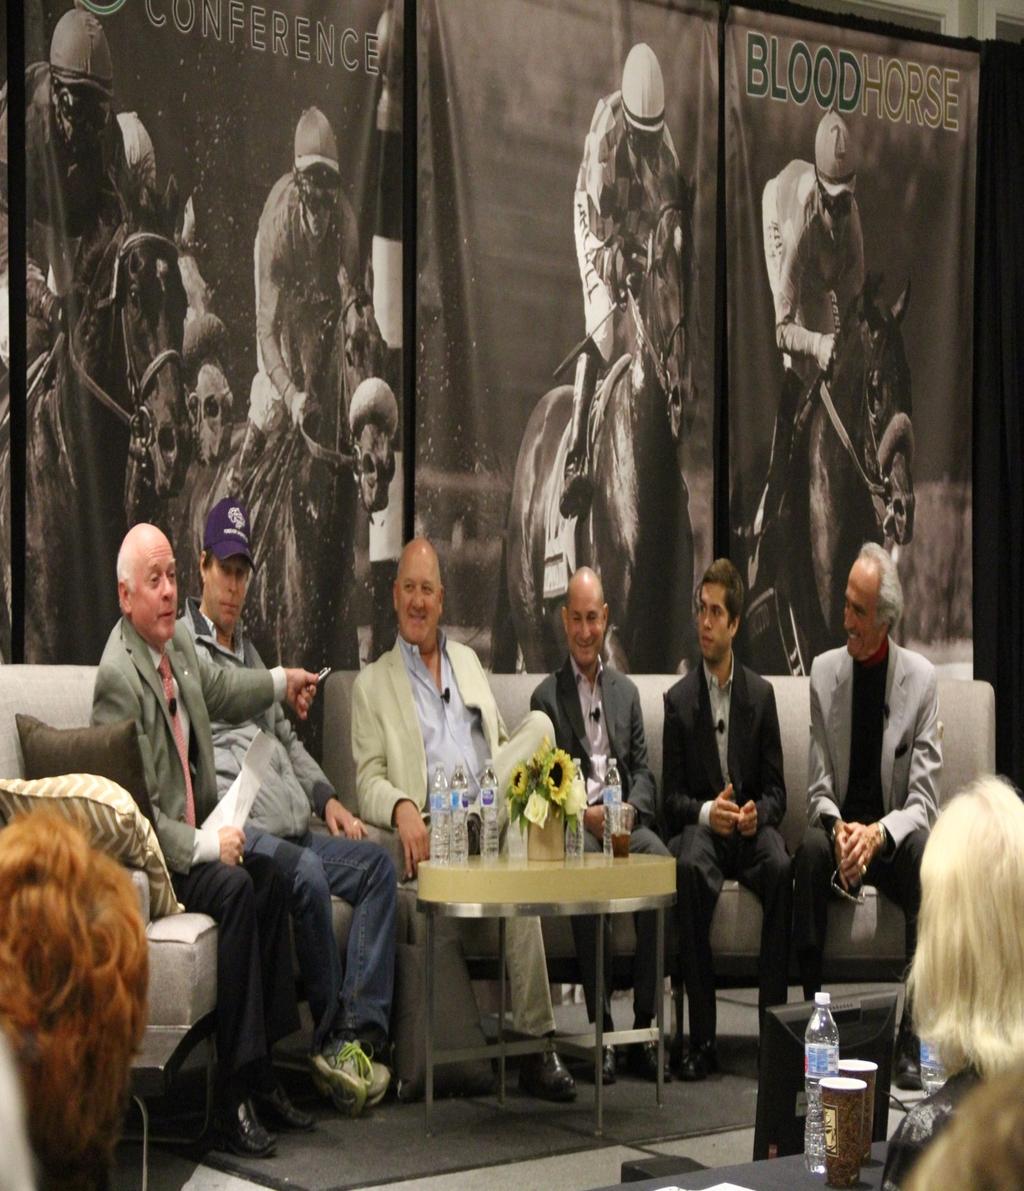 Owners Conferences The Thoroughbred Owner Conference showcases top